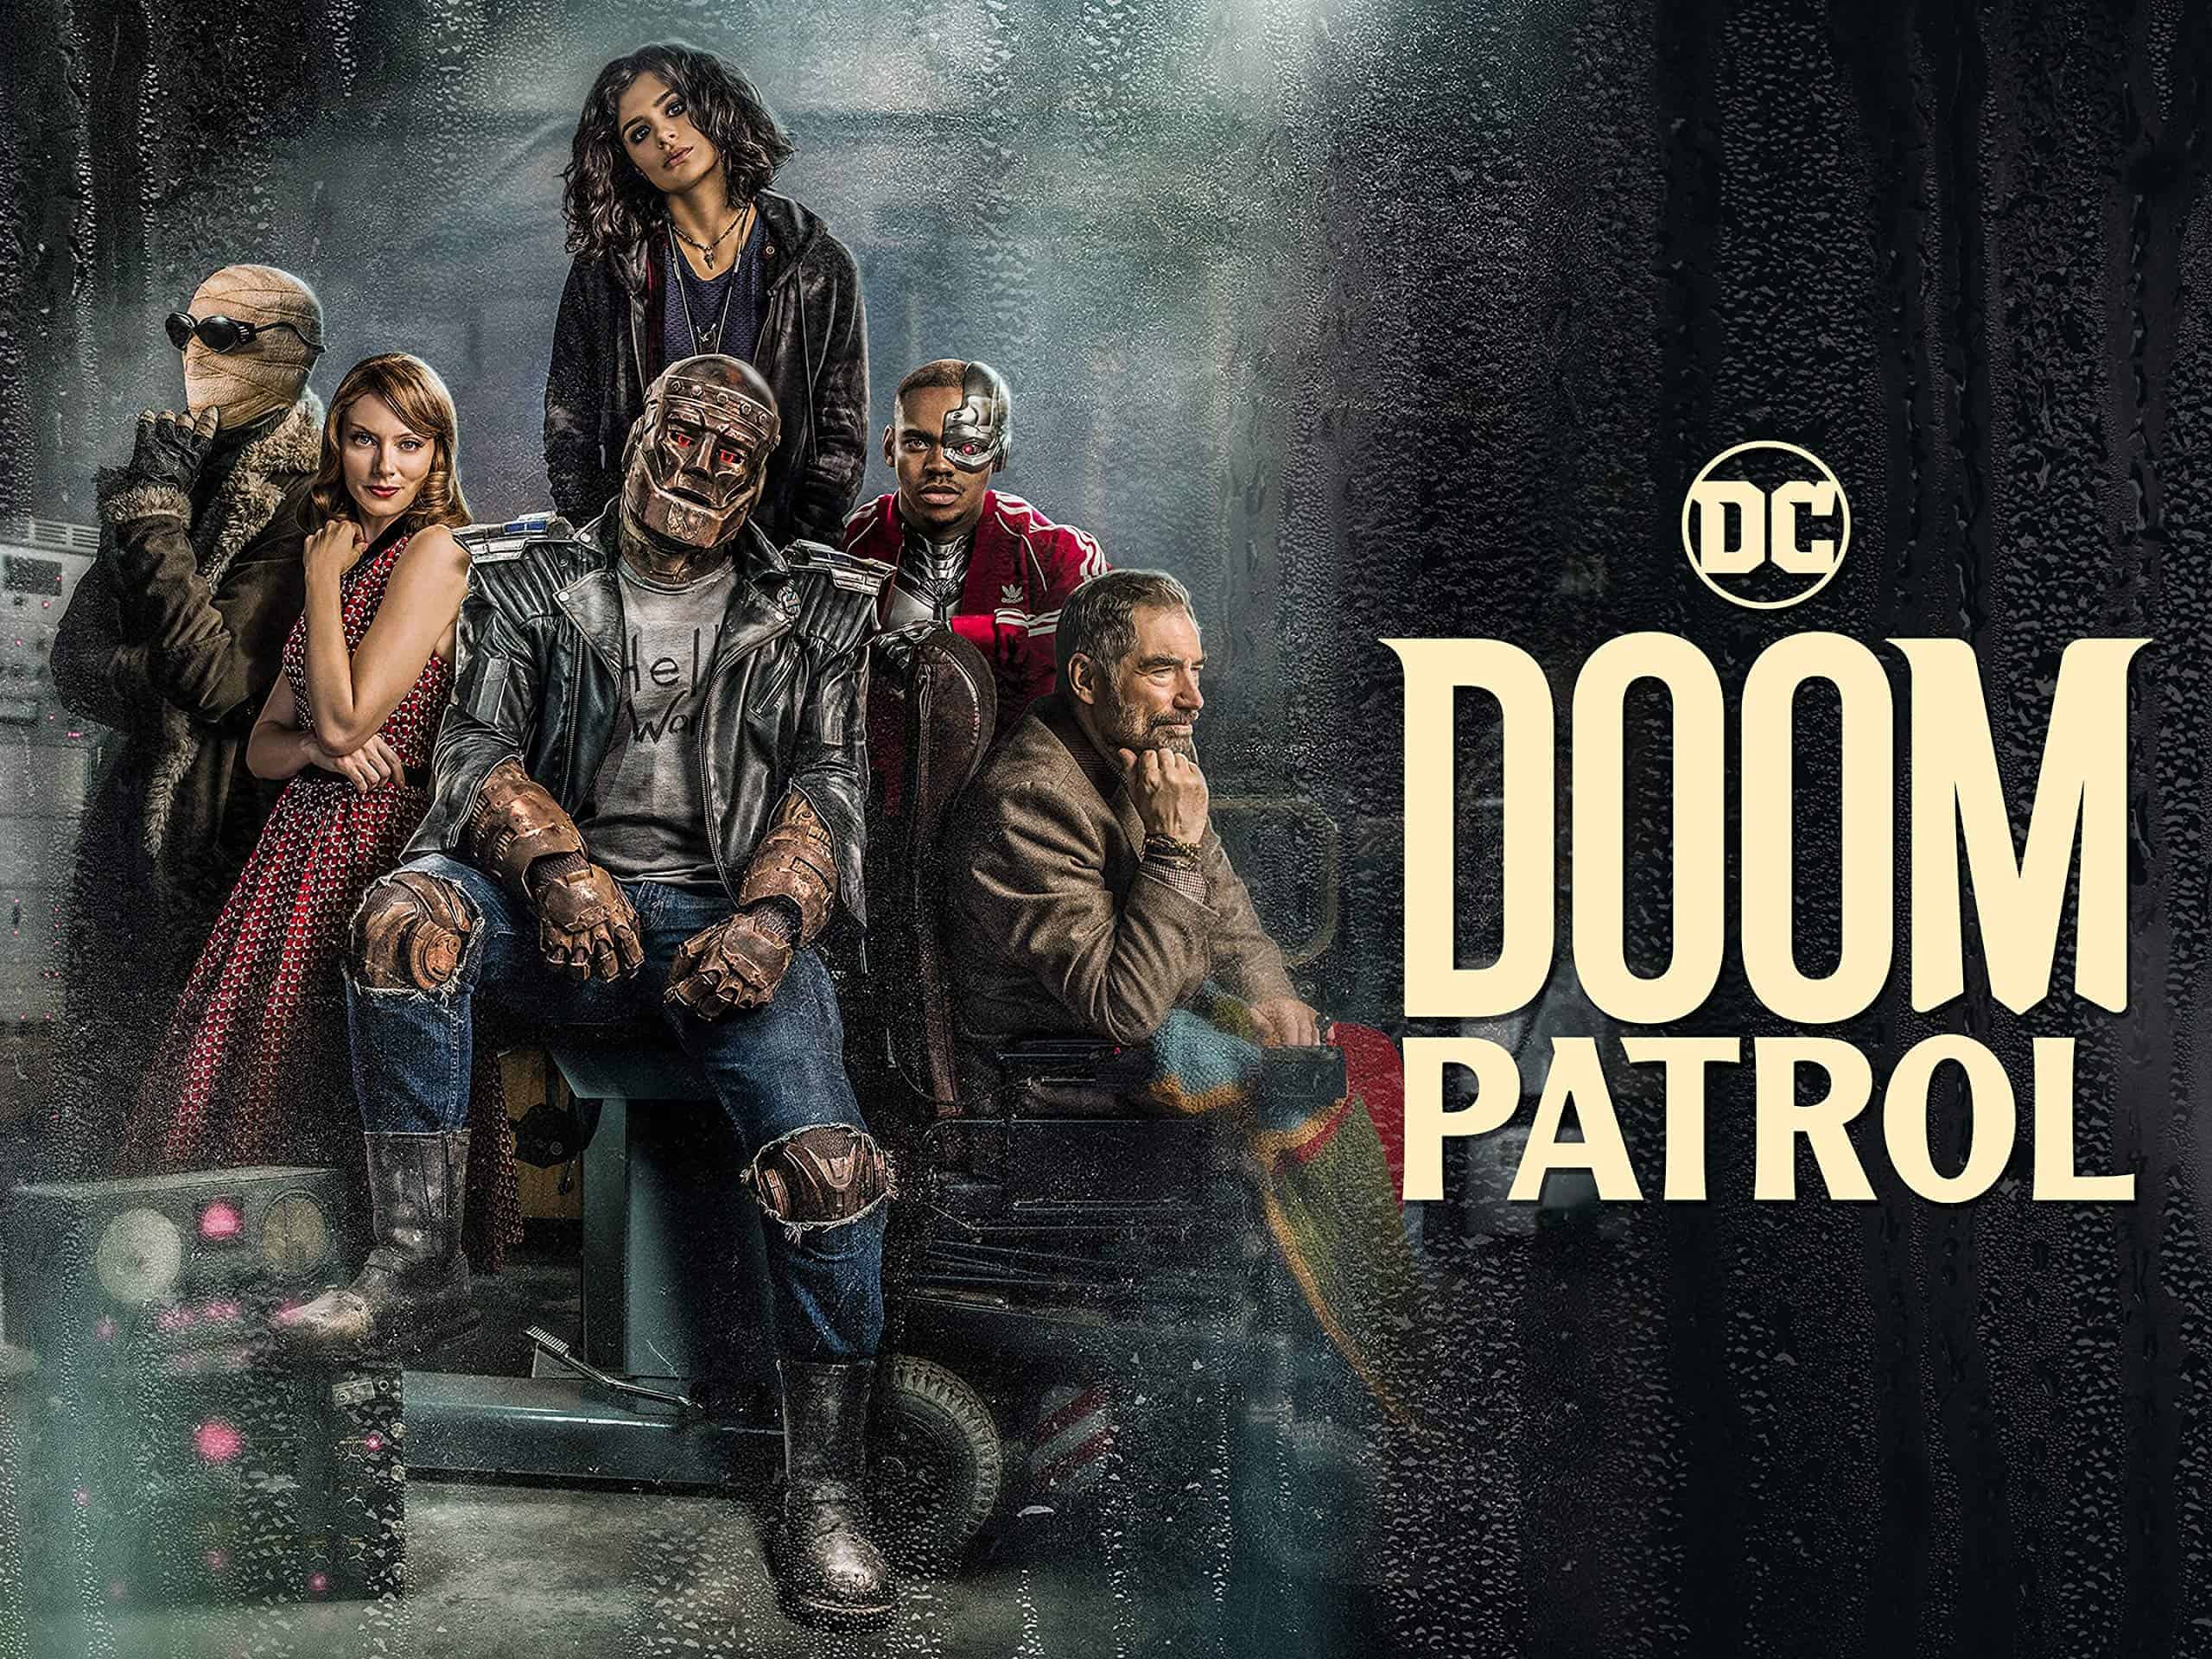 The Cast and Characters of DC’s “Doom Patrol” TV Show